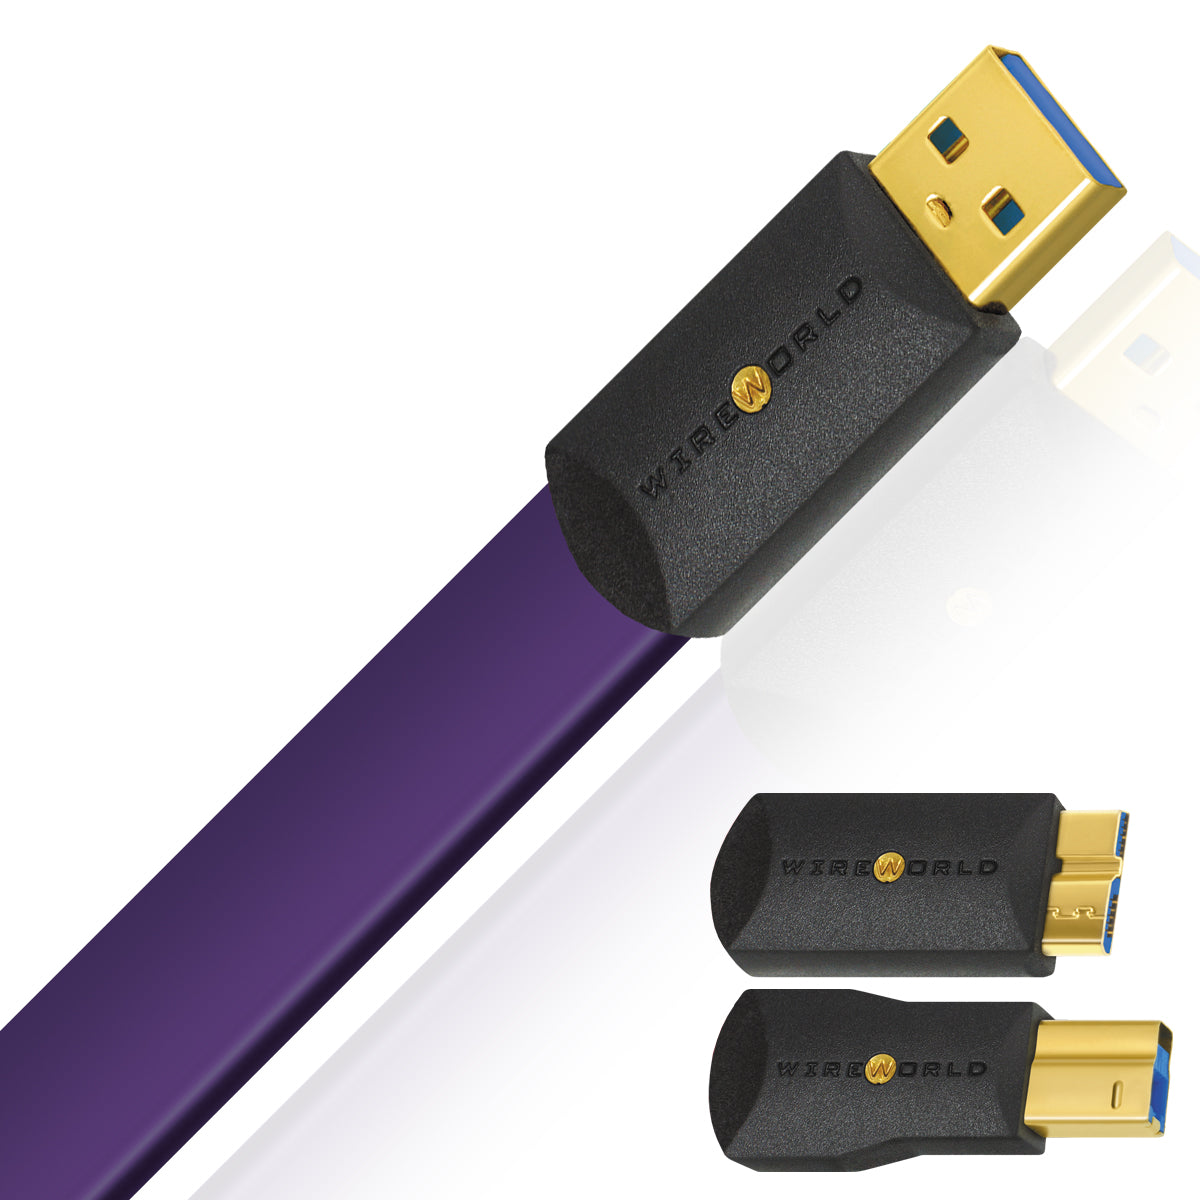 Wireworld Chroma 8 Audio Cables | USB 3.1 Cables